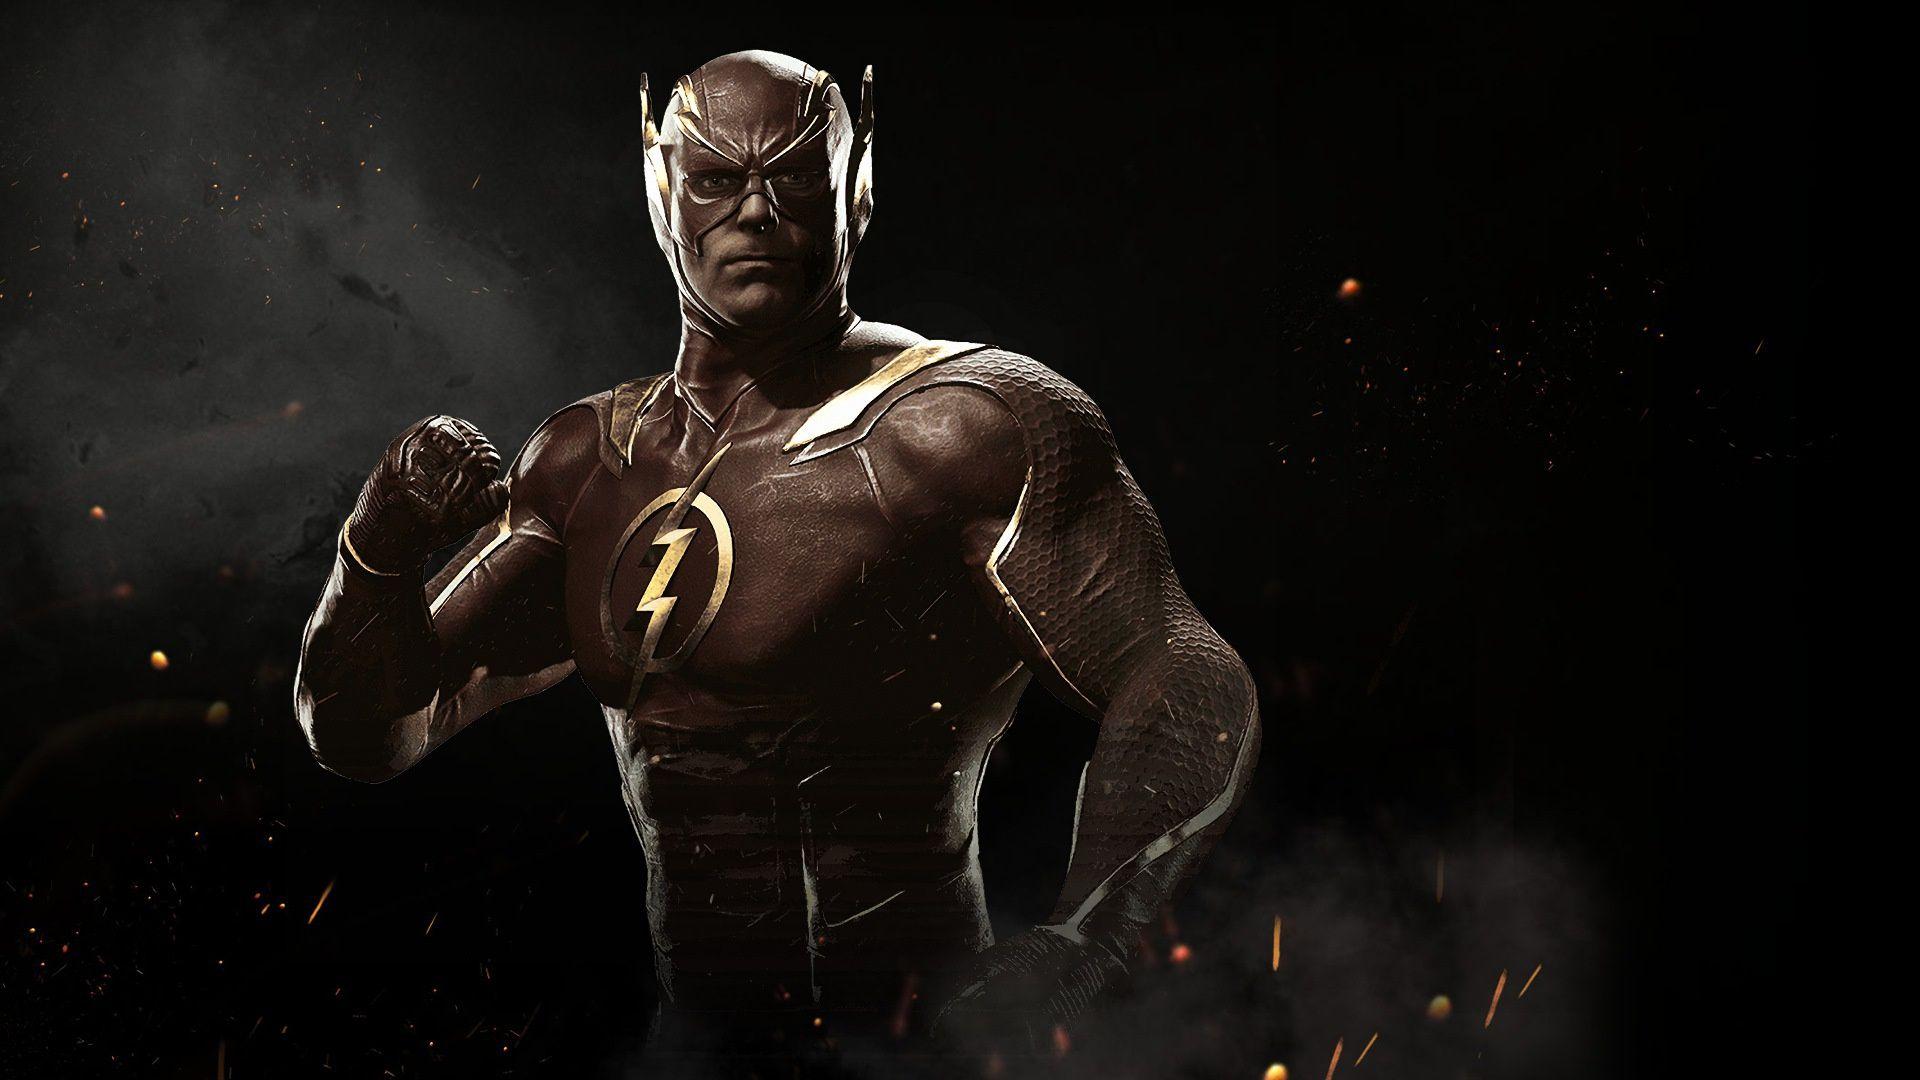 Flash in Injustice Wallpapers